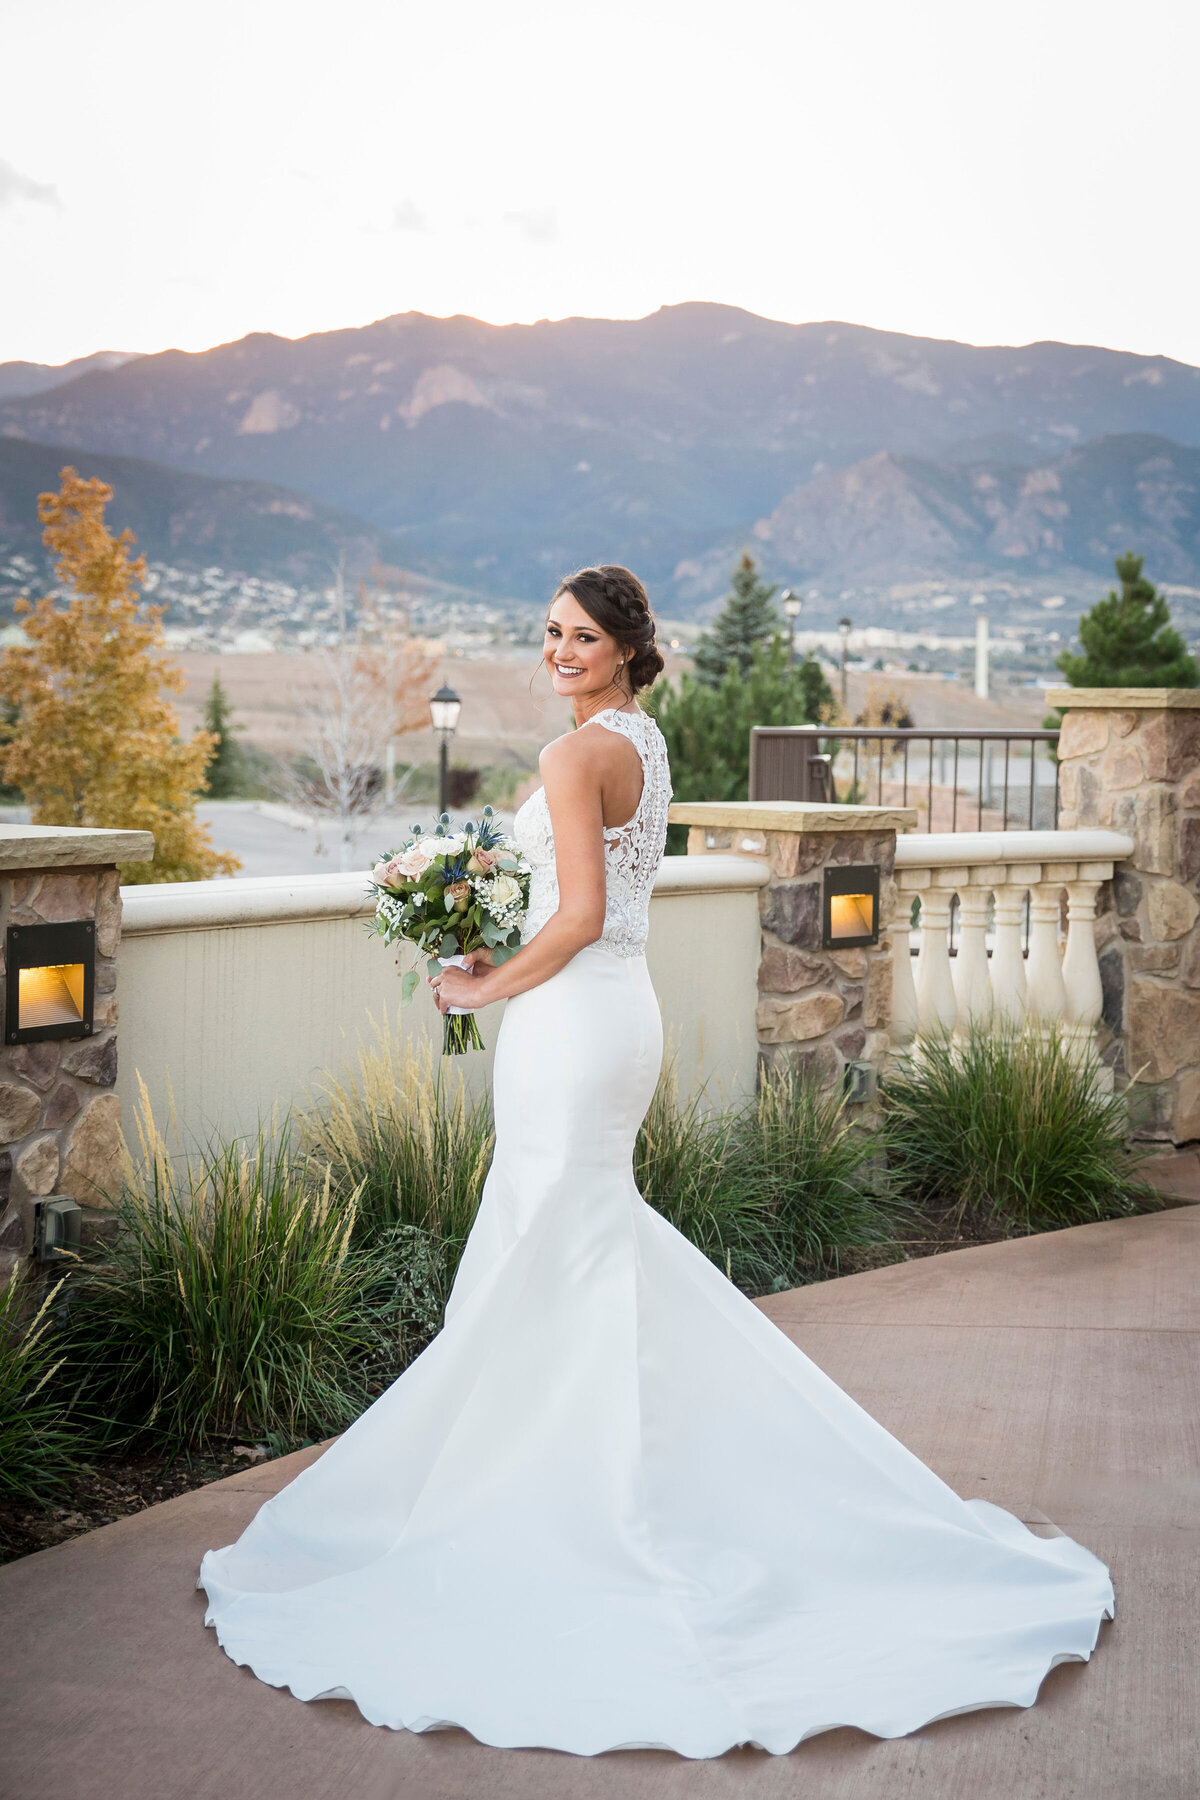 A bride looks over her shoulder, smiling at the camera with the Colorado landscape in the the background.